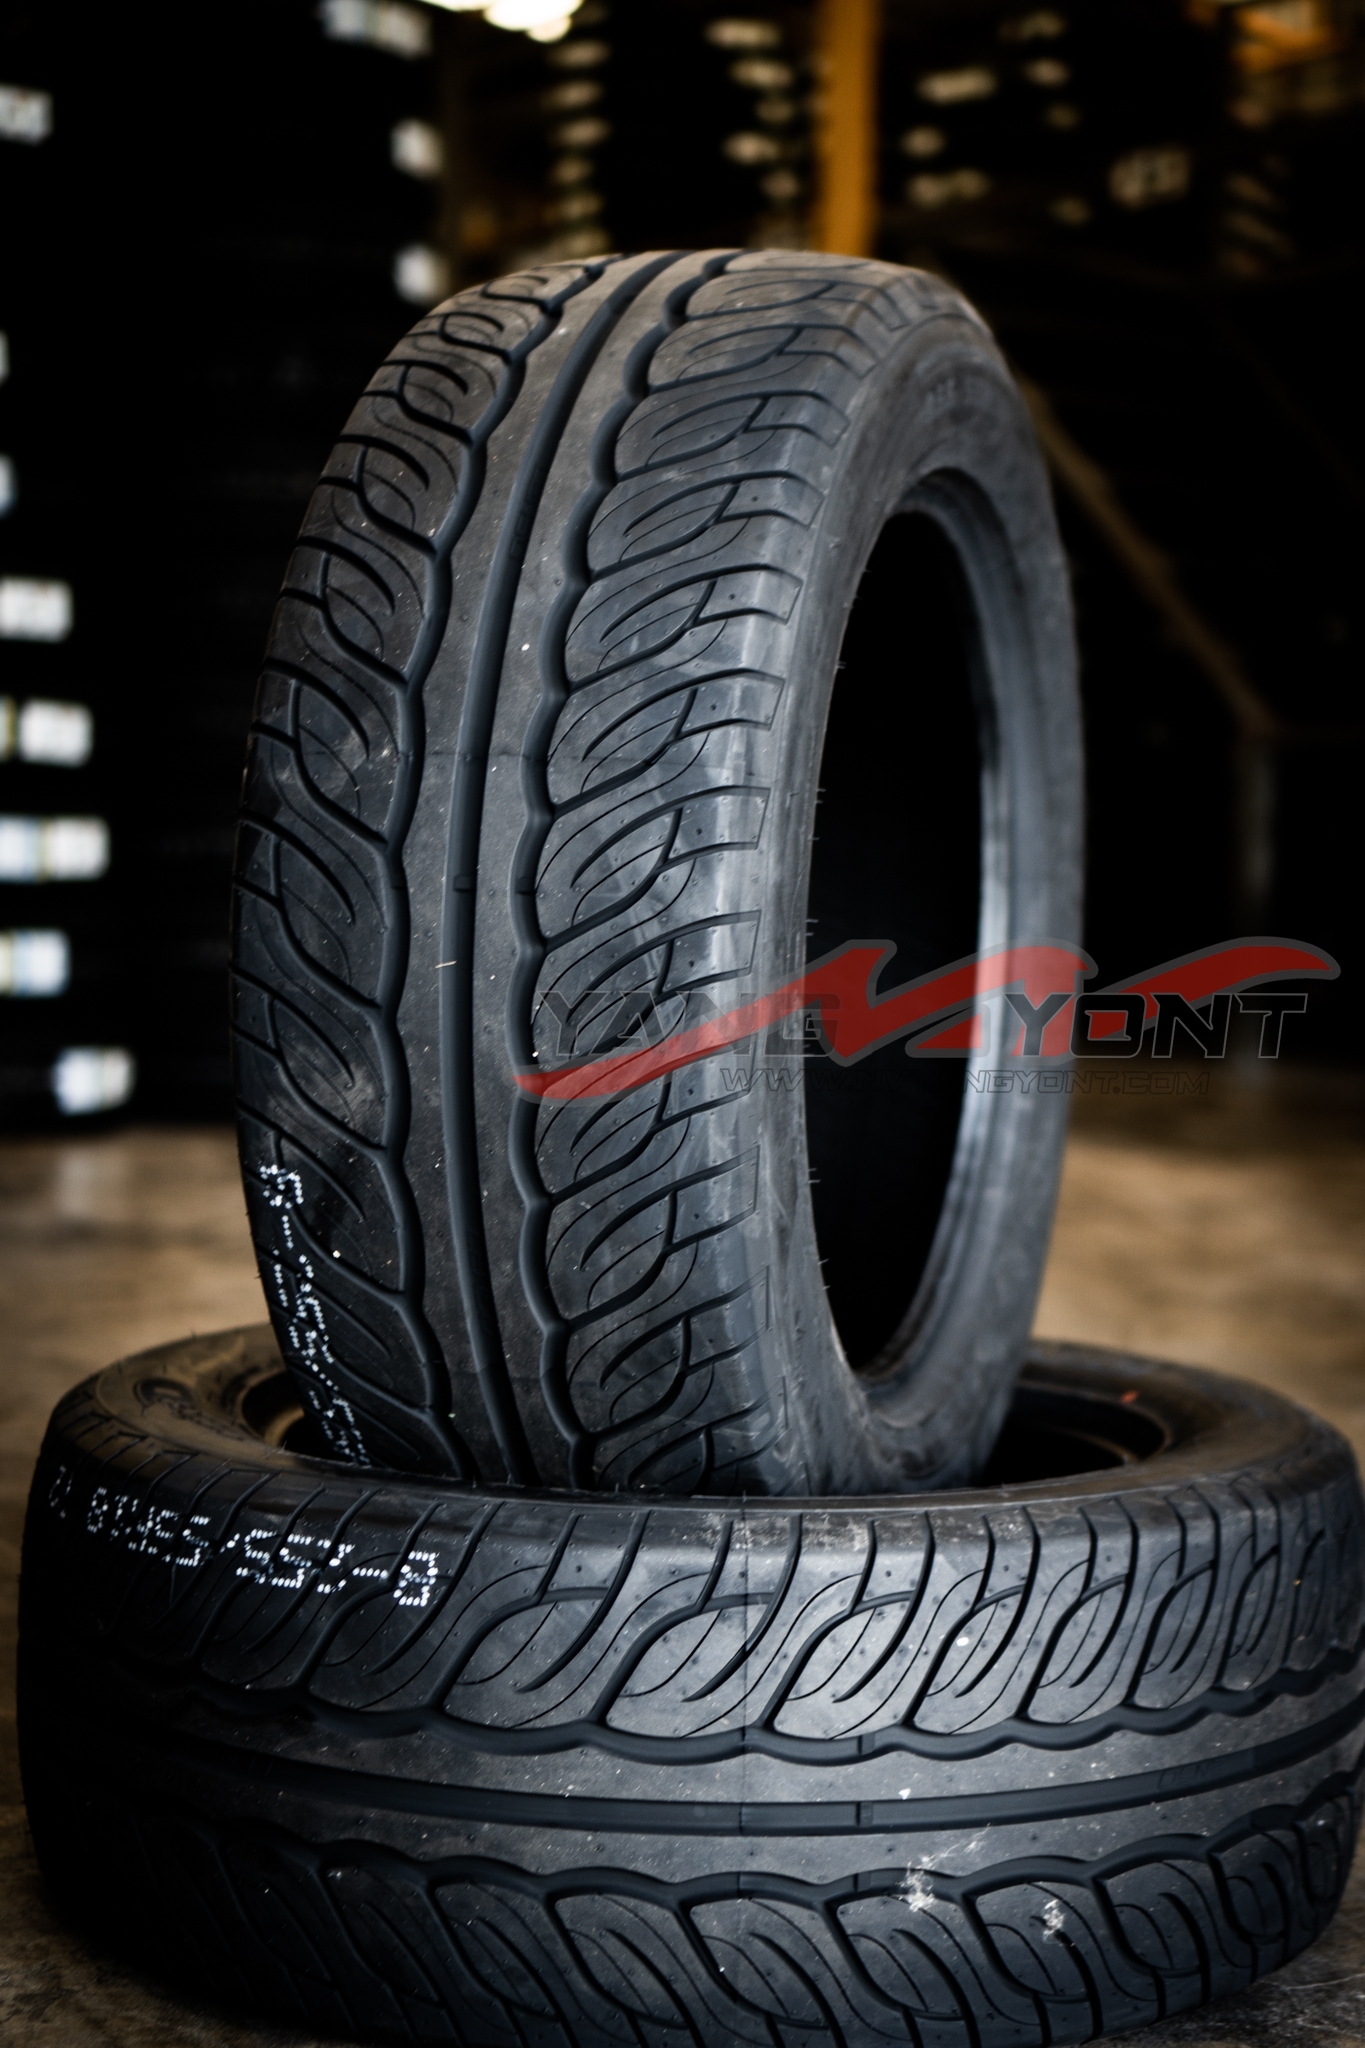 245/40R18 Project D “D-One”